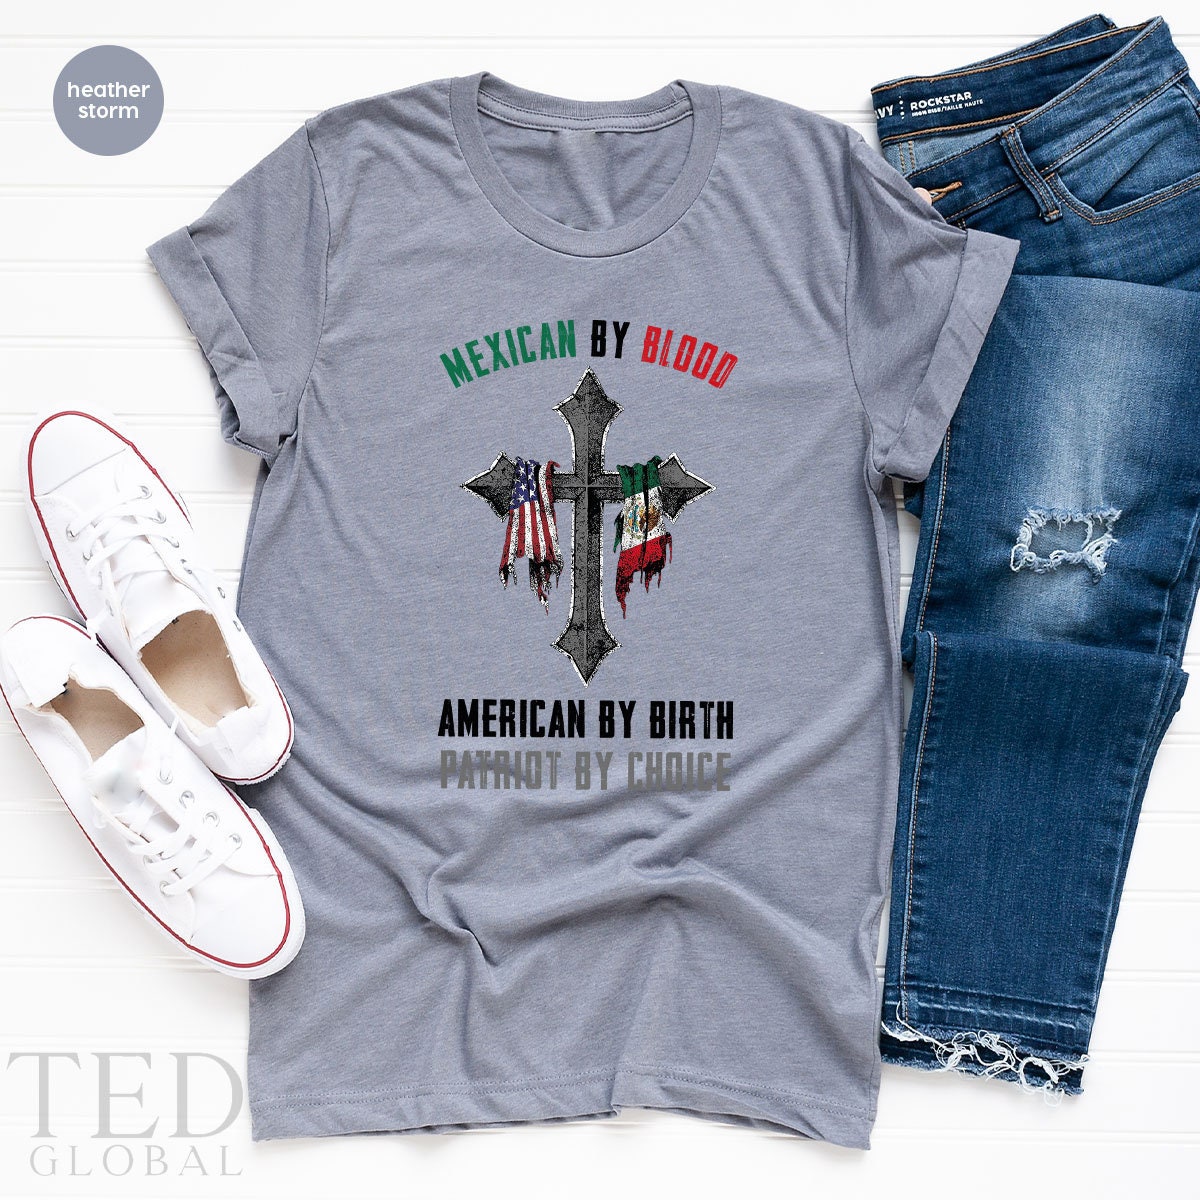 Cute Mexican Shirt, American T Shirt, Mexican By Blood T Shirt, American By Birth Shirts, Patriot By Choice T-Shirt, Gift For Mexican - Fastdeliverytees.com